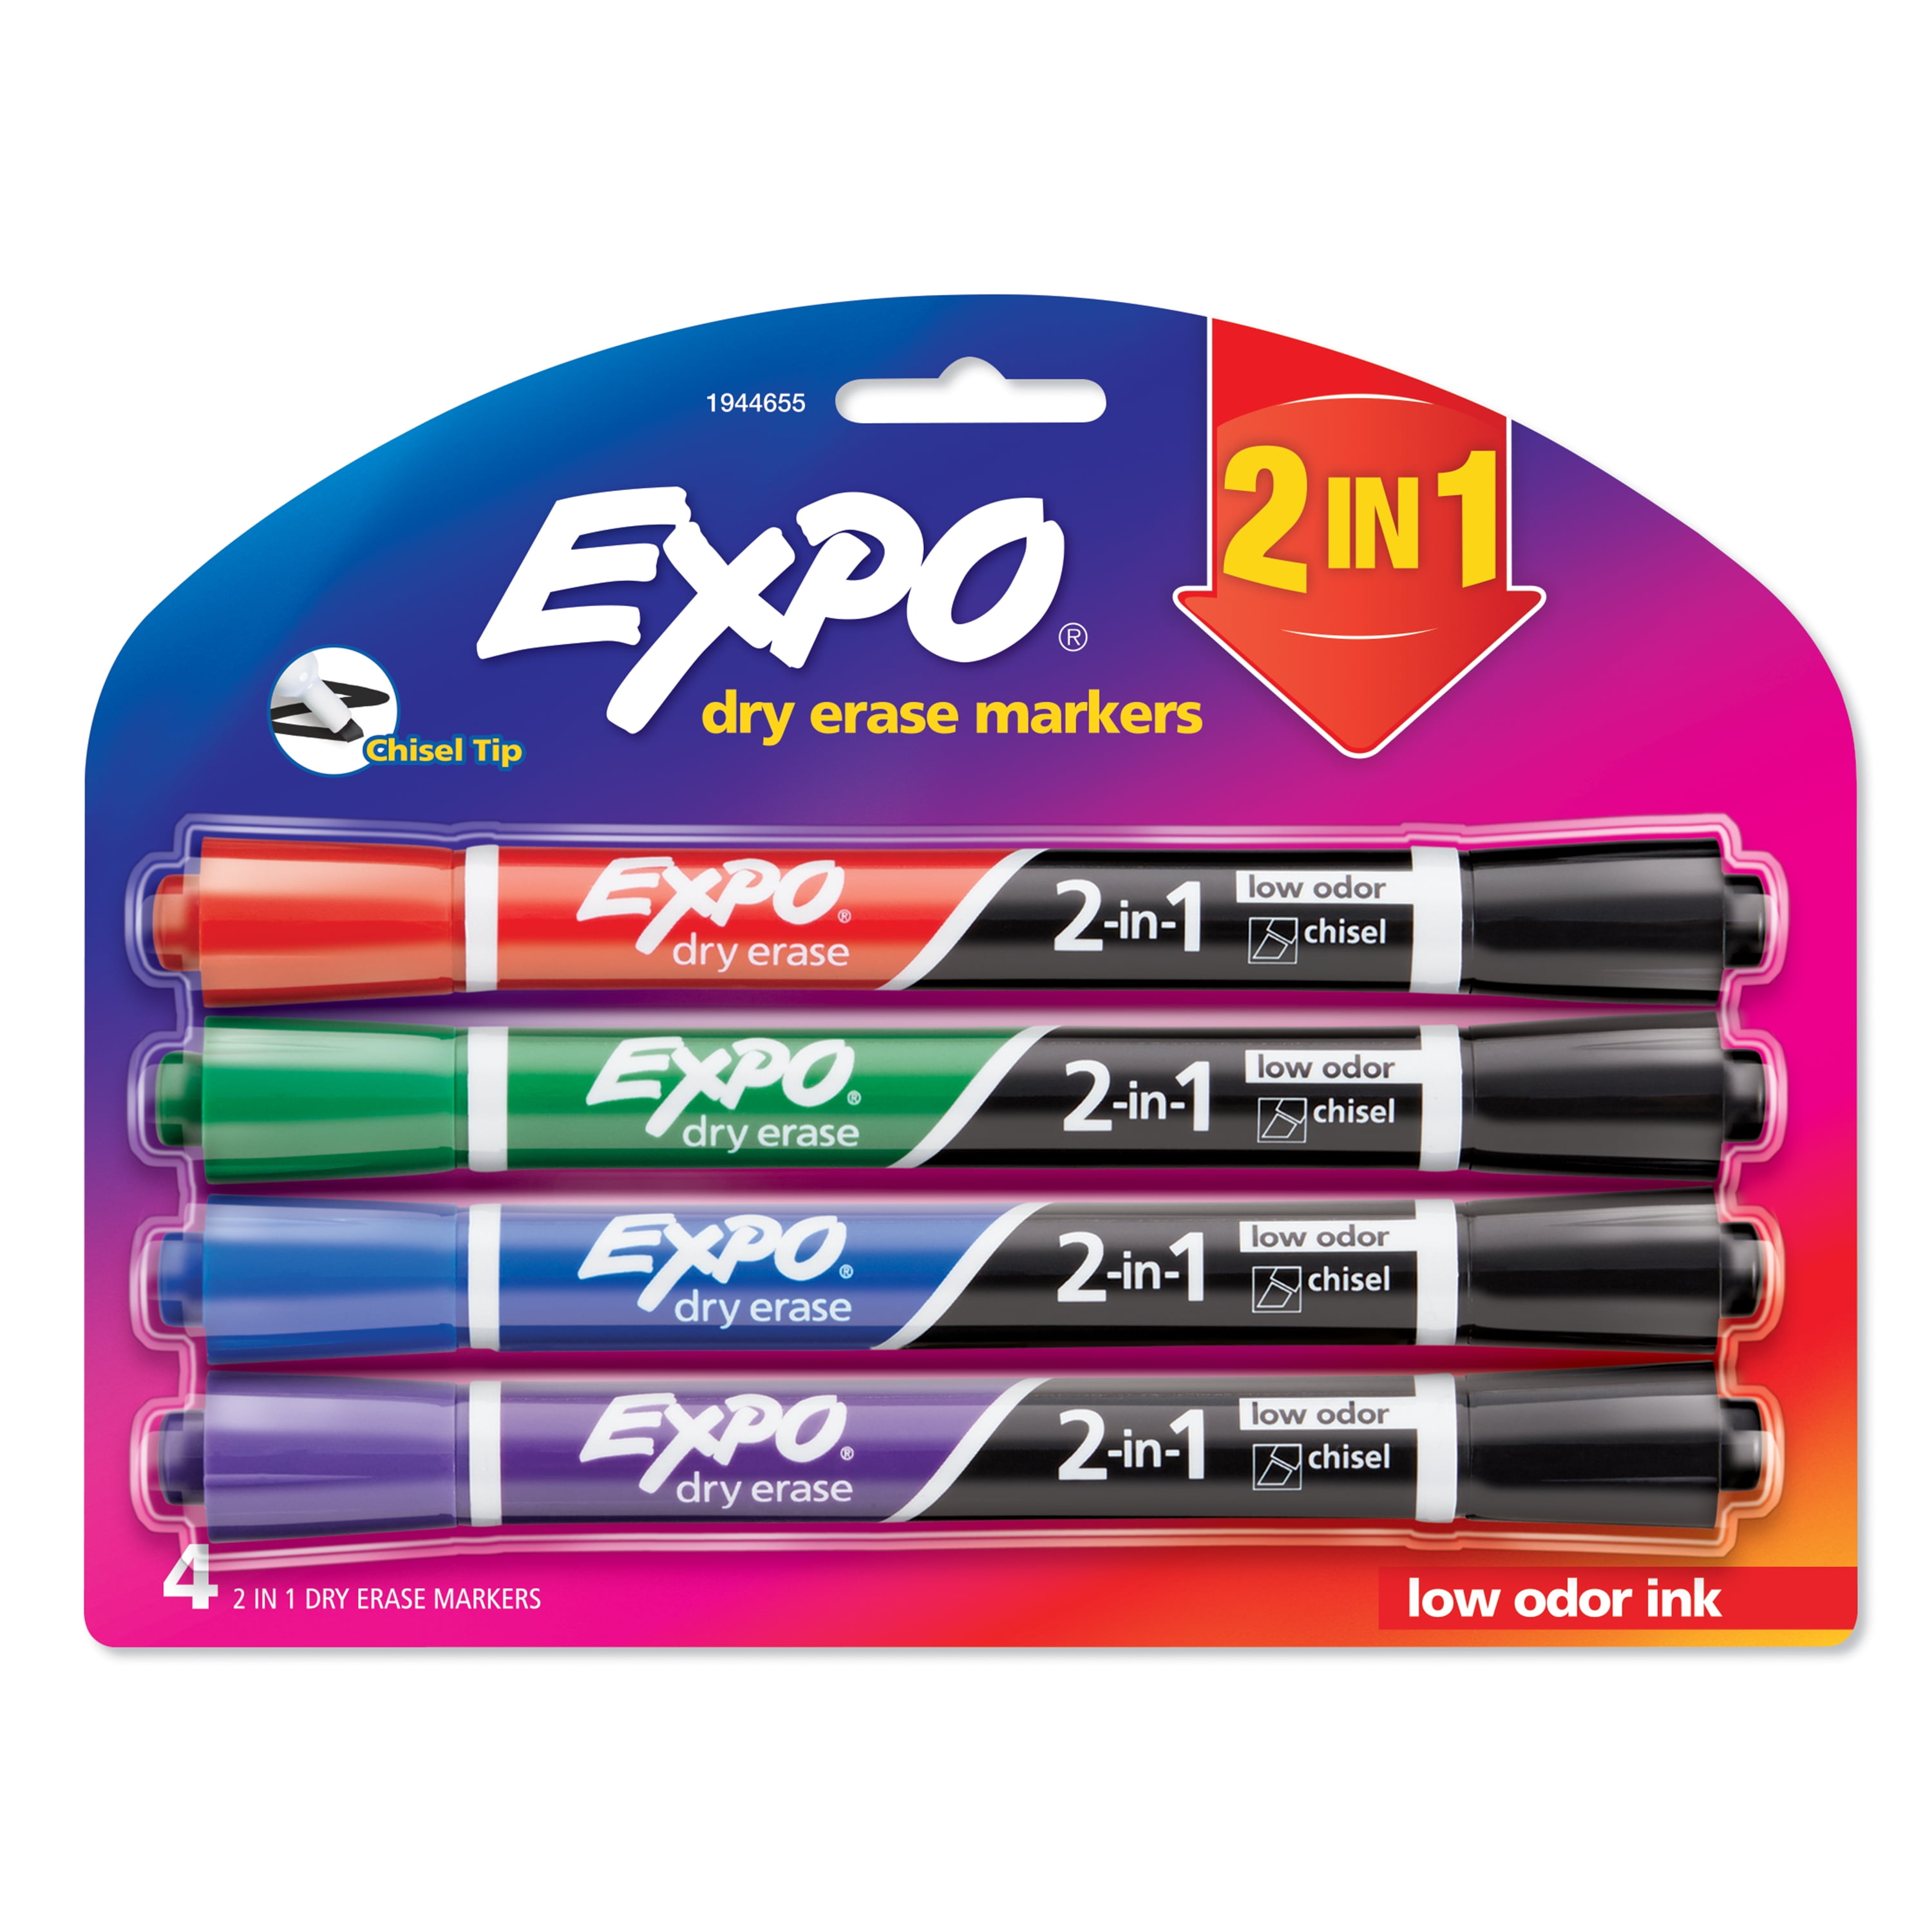 12 Expo Low Odor Dry Erase Chisel Markers Red New In Box 1870161   1 Dozen 